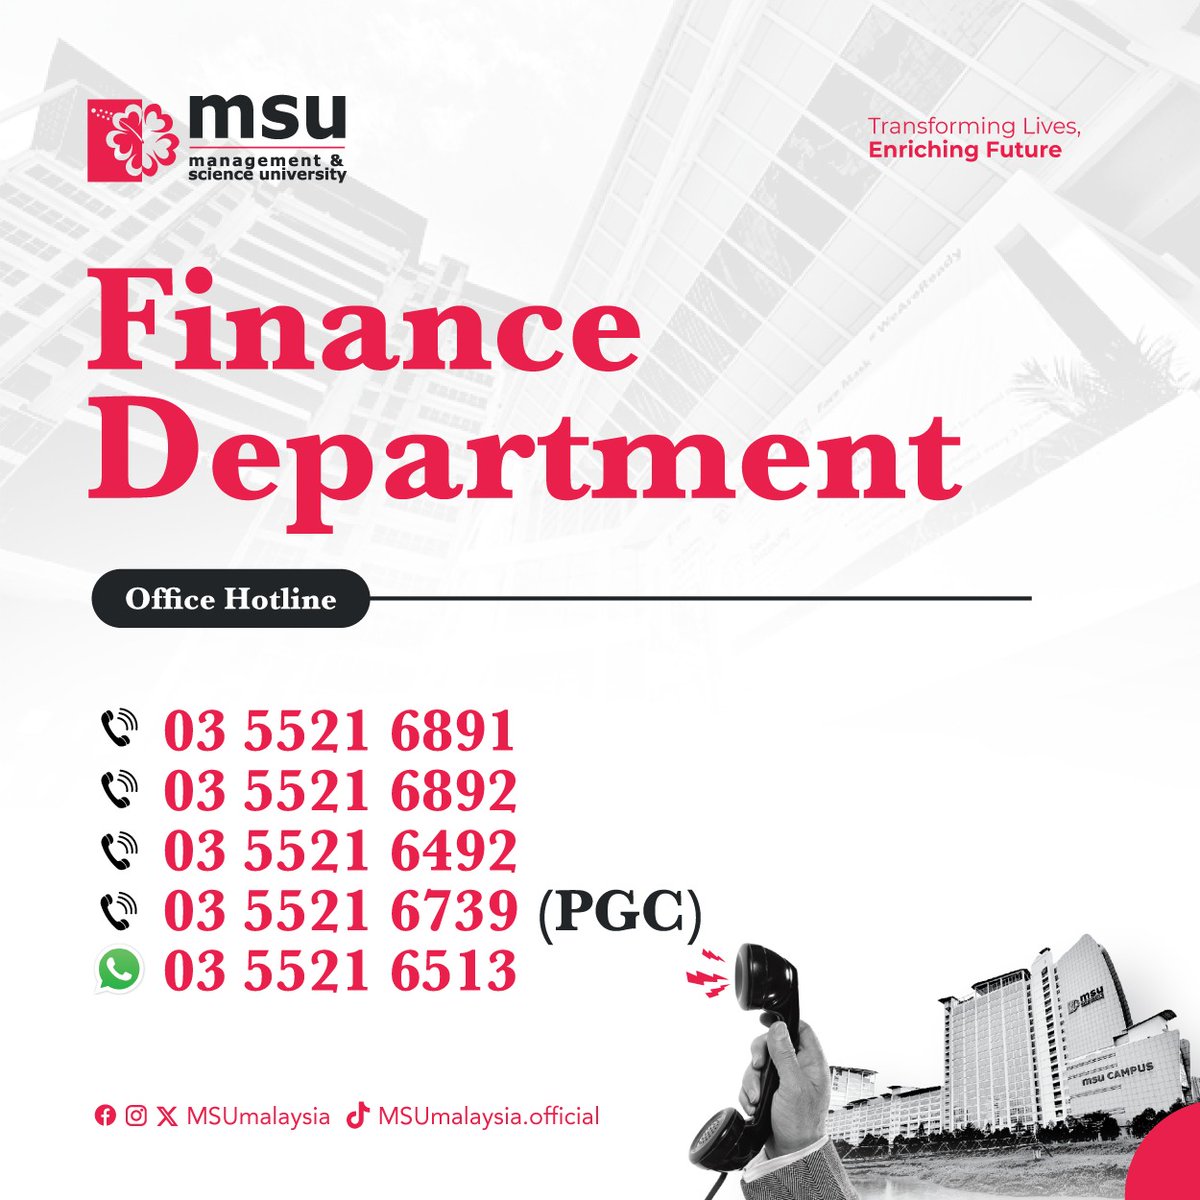 Attention to all students, Need some financial advice or assistance? Check out these hotlines to connect with the finance department! #MSUmalaysia @DeptMsu